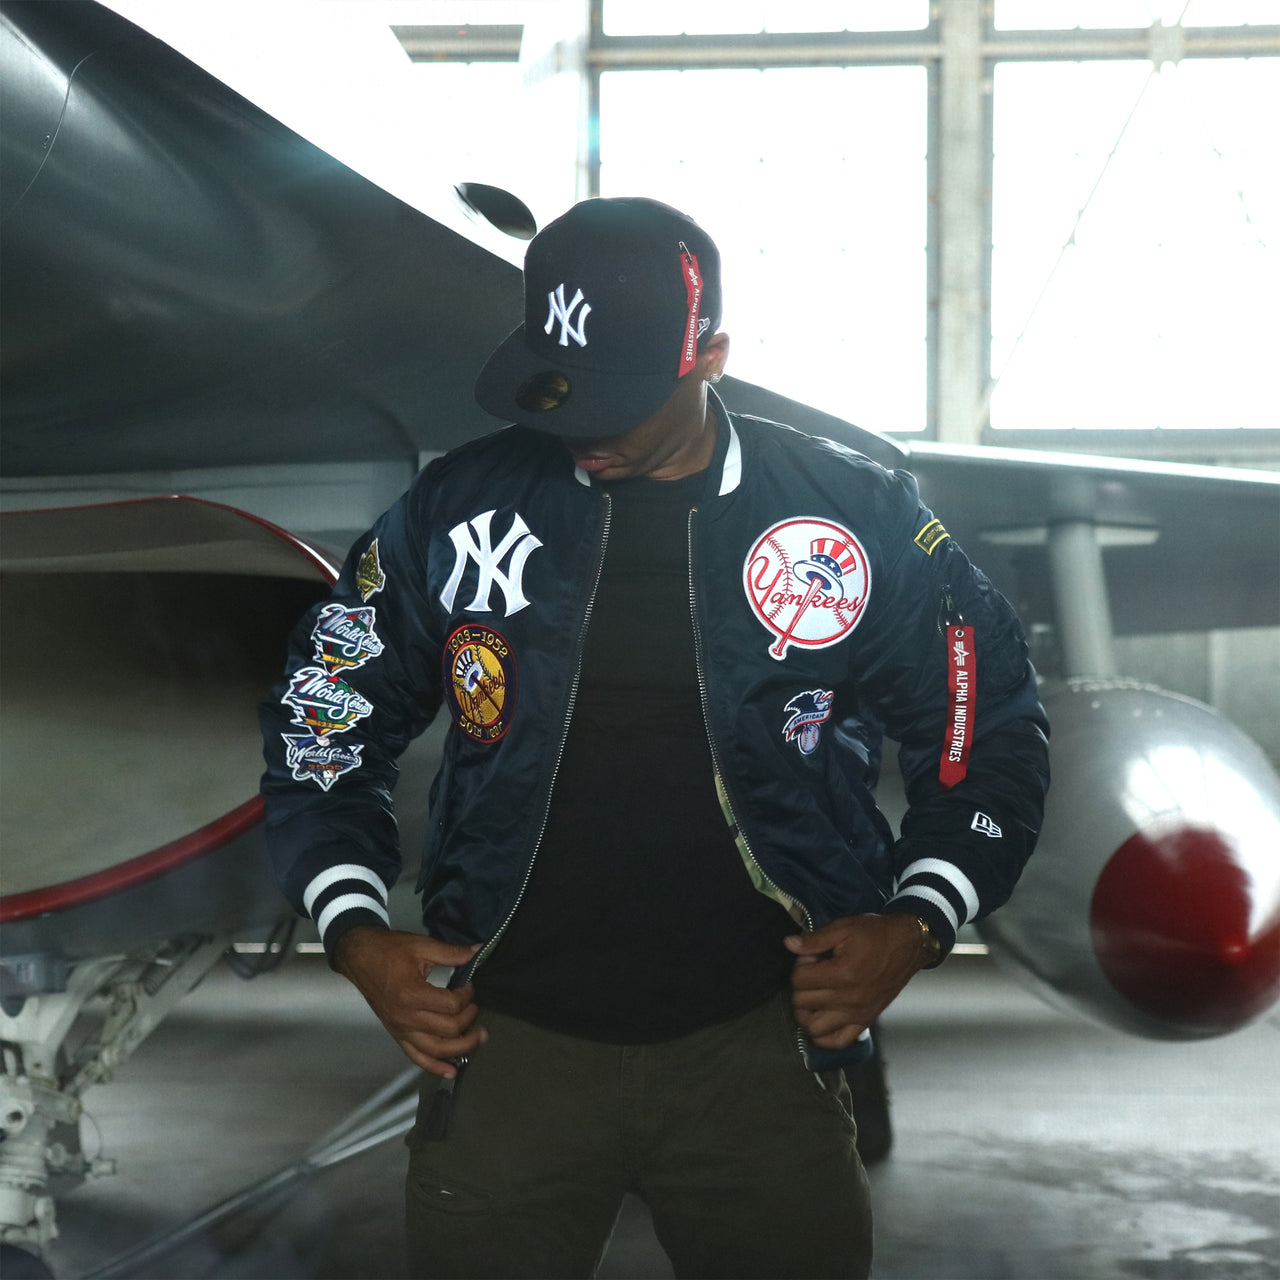 The New York Yankees MLB Patch Alpha Industries Reversible Bomber Jacket With Camo Liner | Navy Blue Bomber Jacket opened